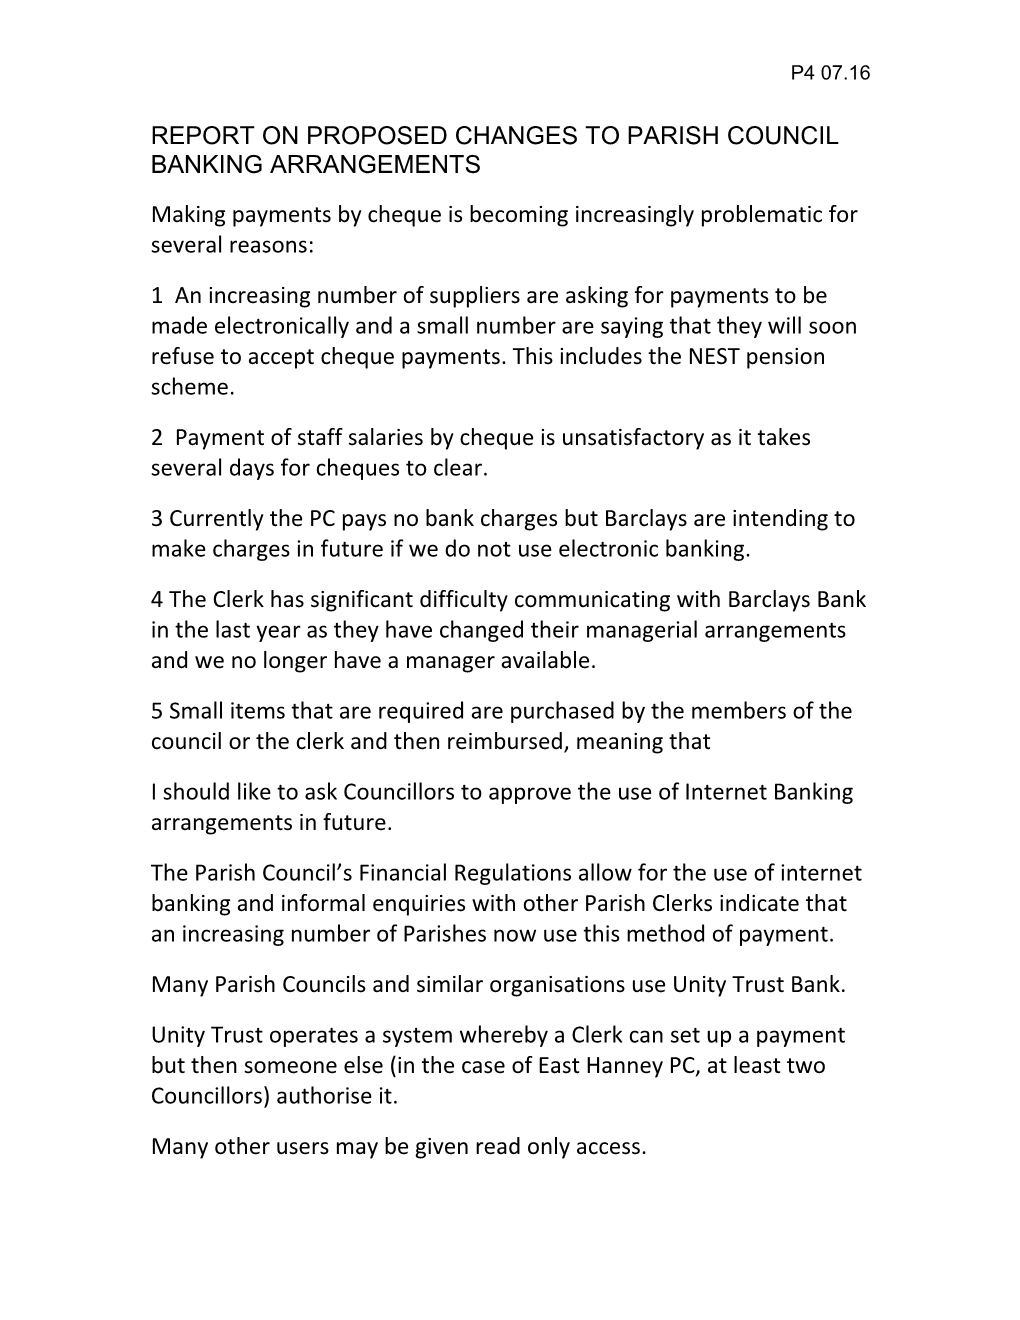 Report on Proposed Changes to Parish Council Banking Arrangements